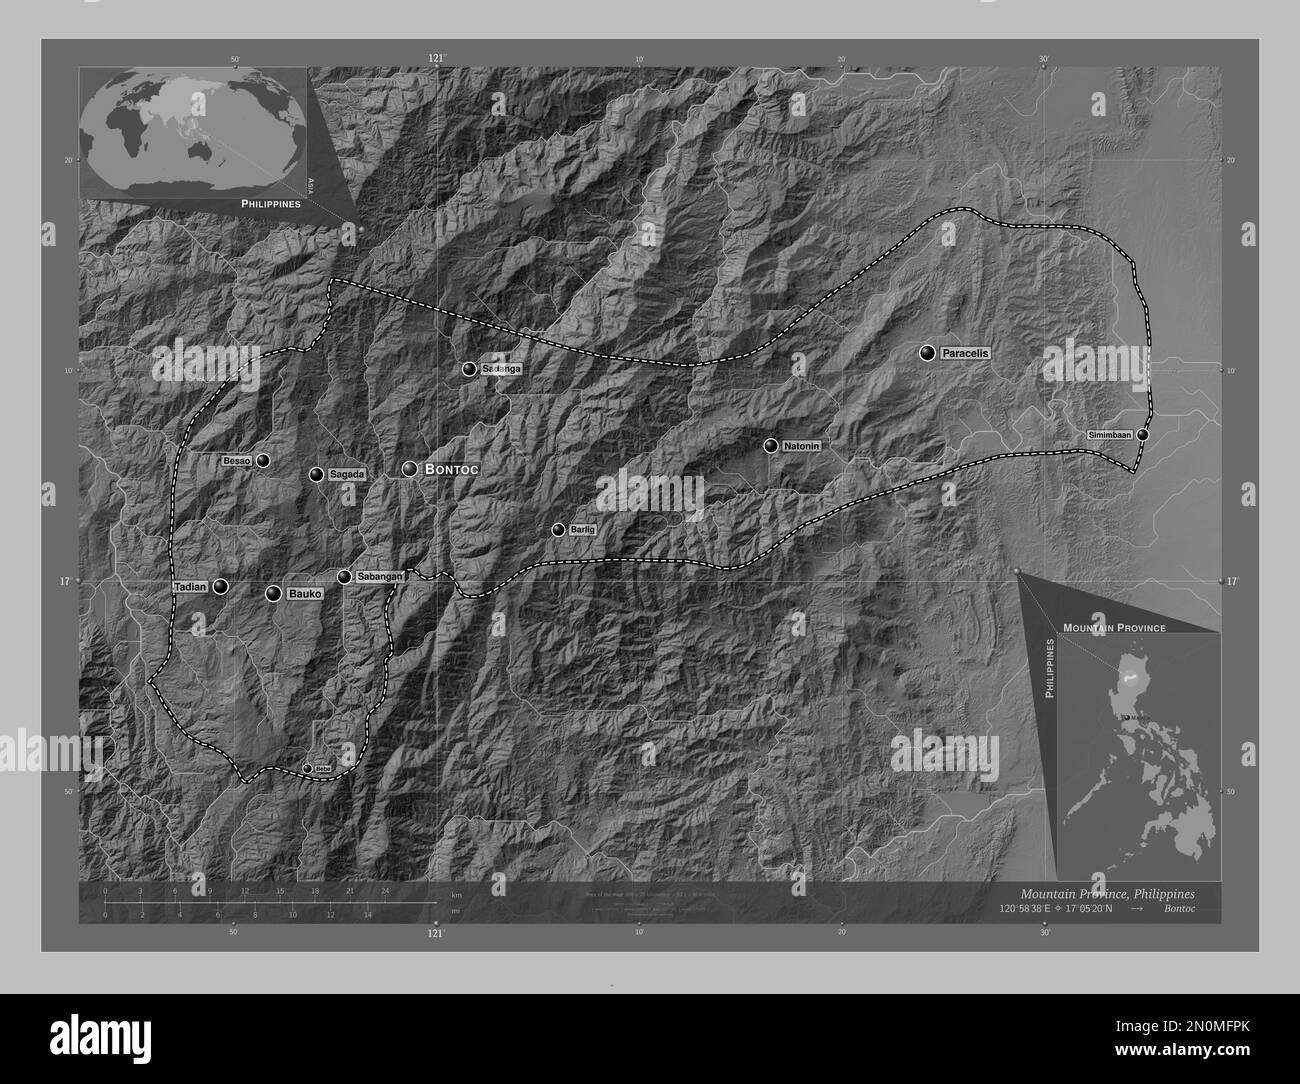 Mountain Province, province of Philippines. Grayscale elevation map with lakes and rivers. Locations and names of major cities of the region. Corner a Stock Photo